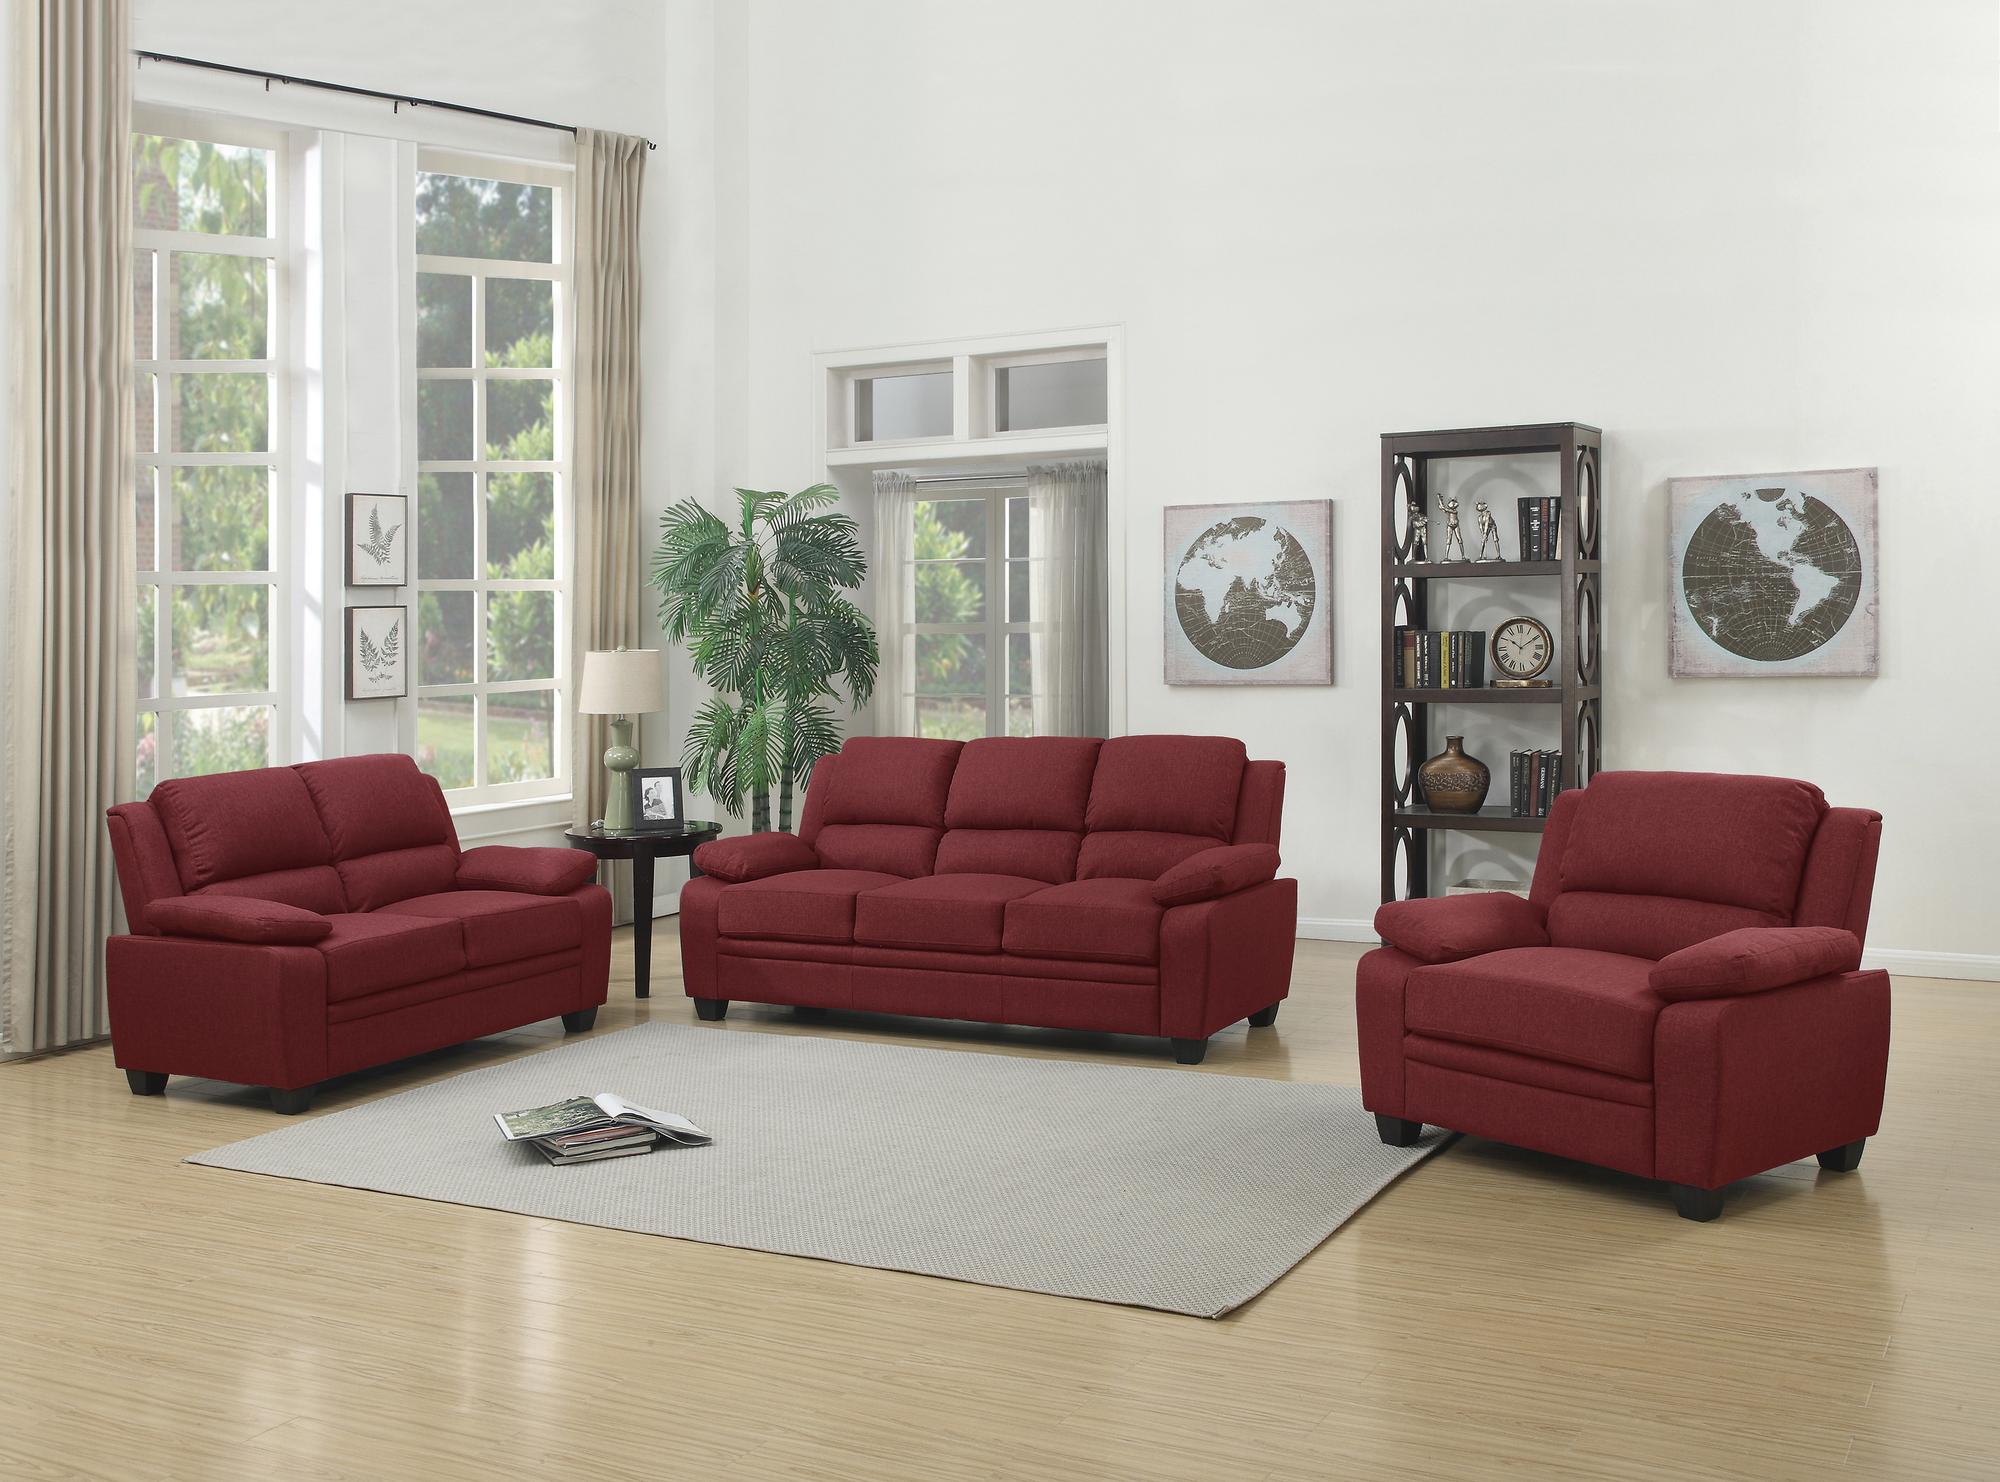 te dramatiker Tigge Rent to Own Salo Merchandise 2 - Piece Darien Sofa and Loveseat - Red at  Aaron's today!